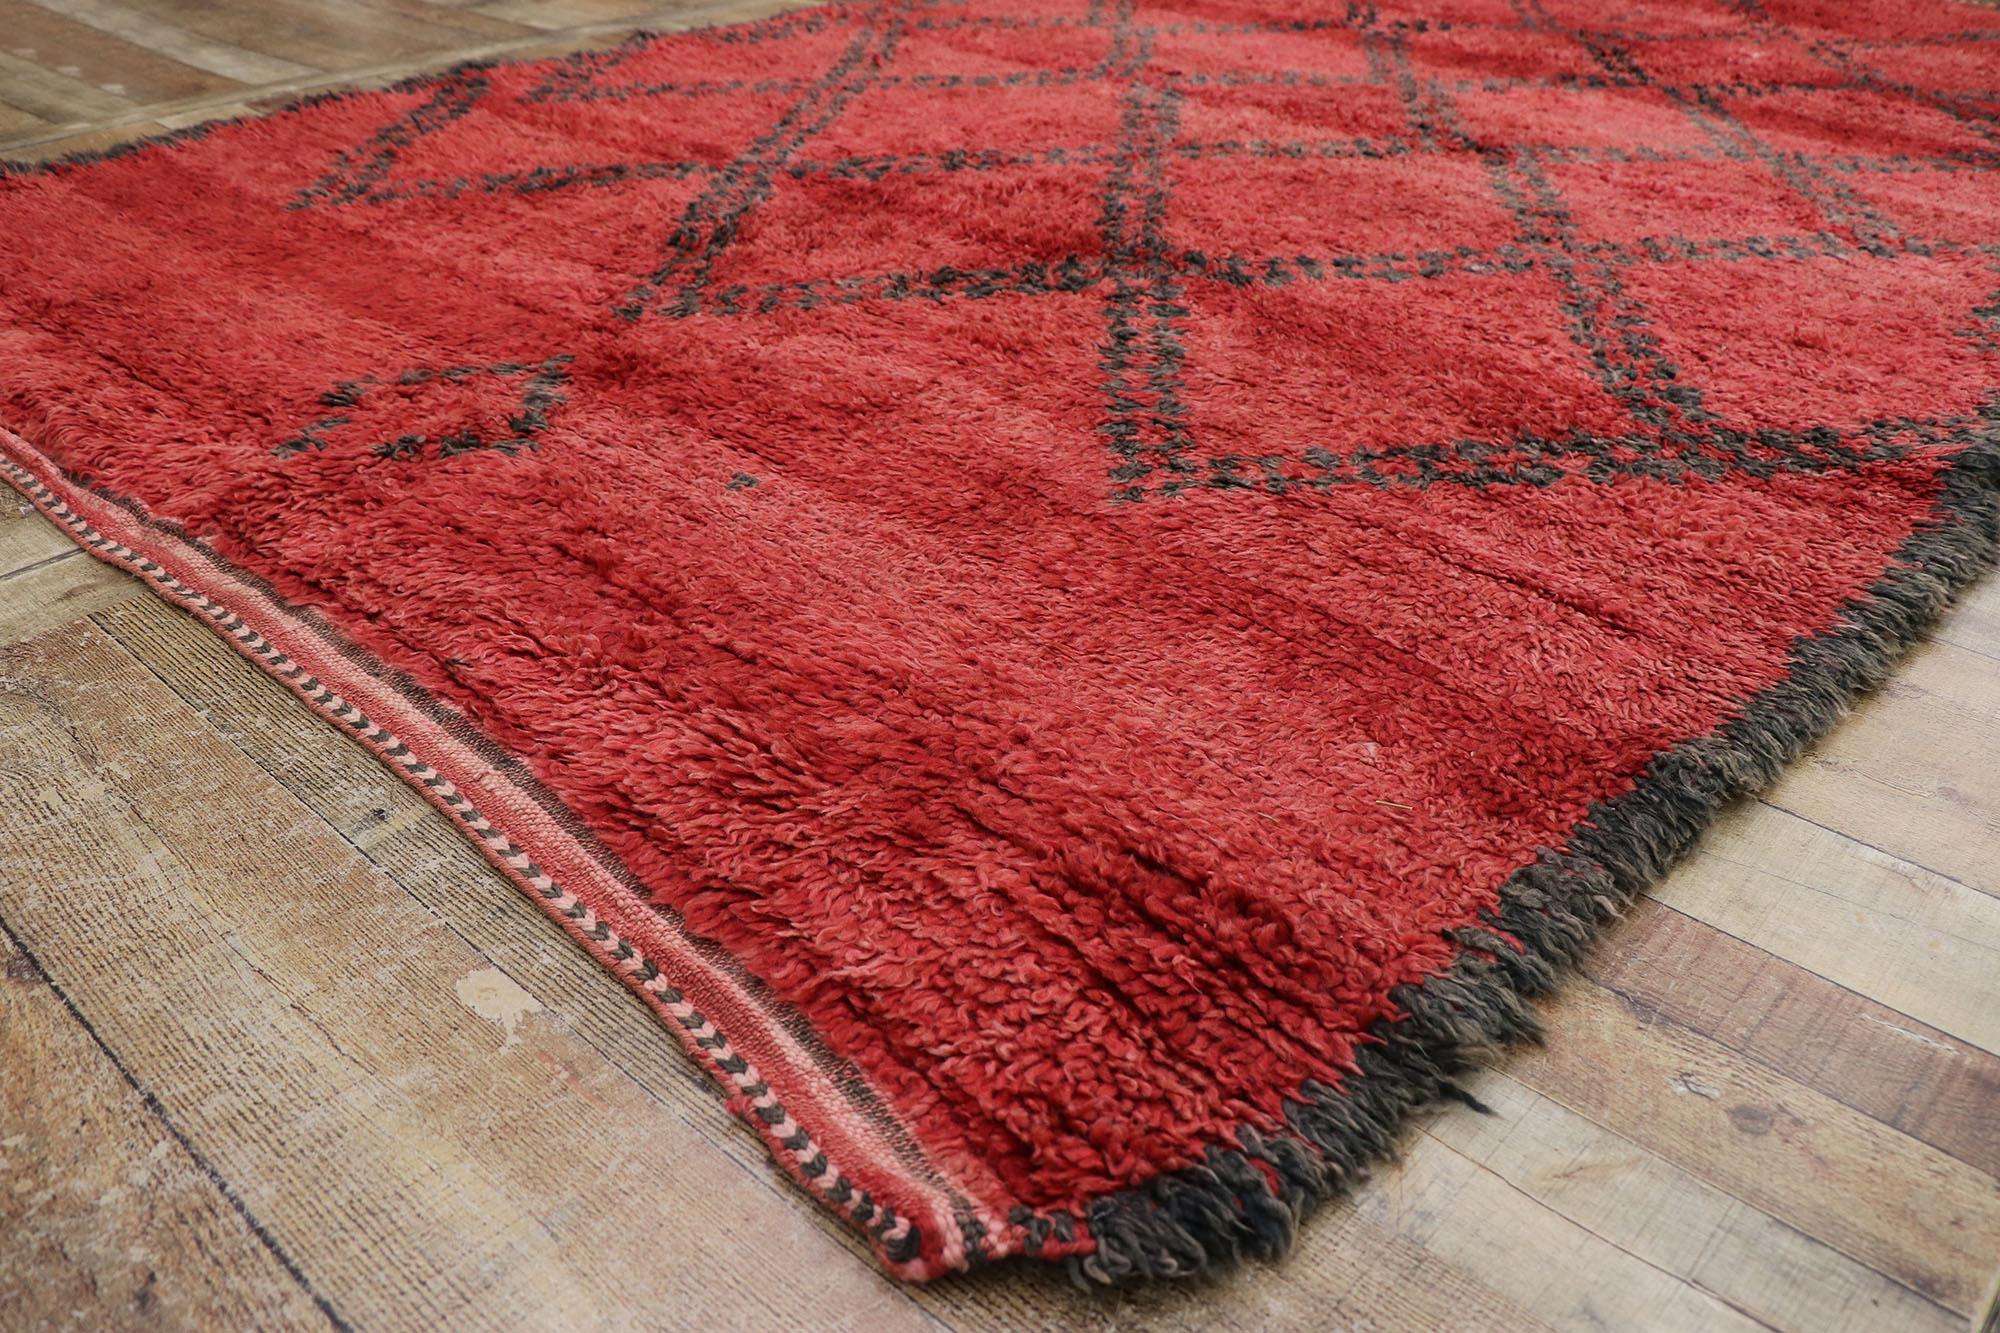 Wool Vintage Berber Red Beni M'Guild Moroccan Rug with Modern Tribal Style For Sale